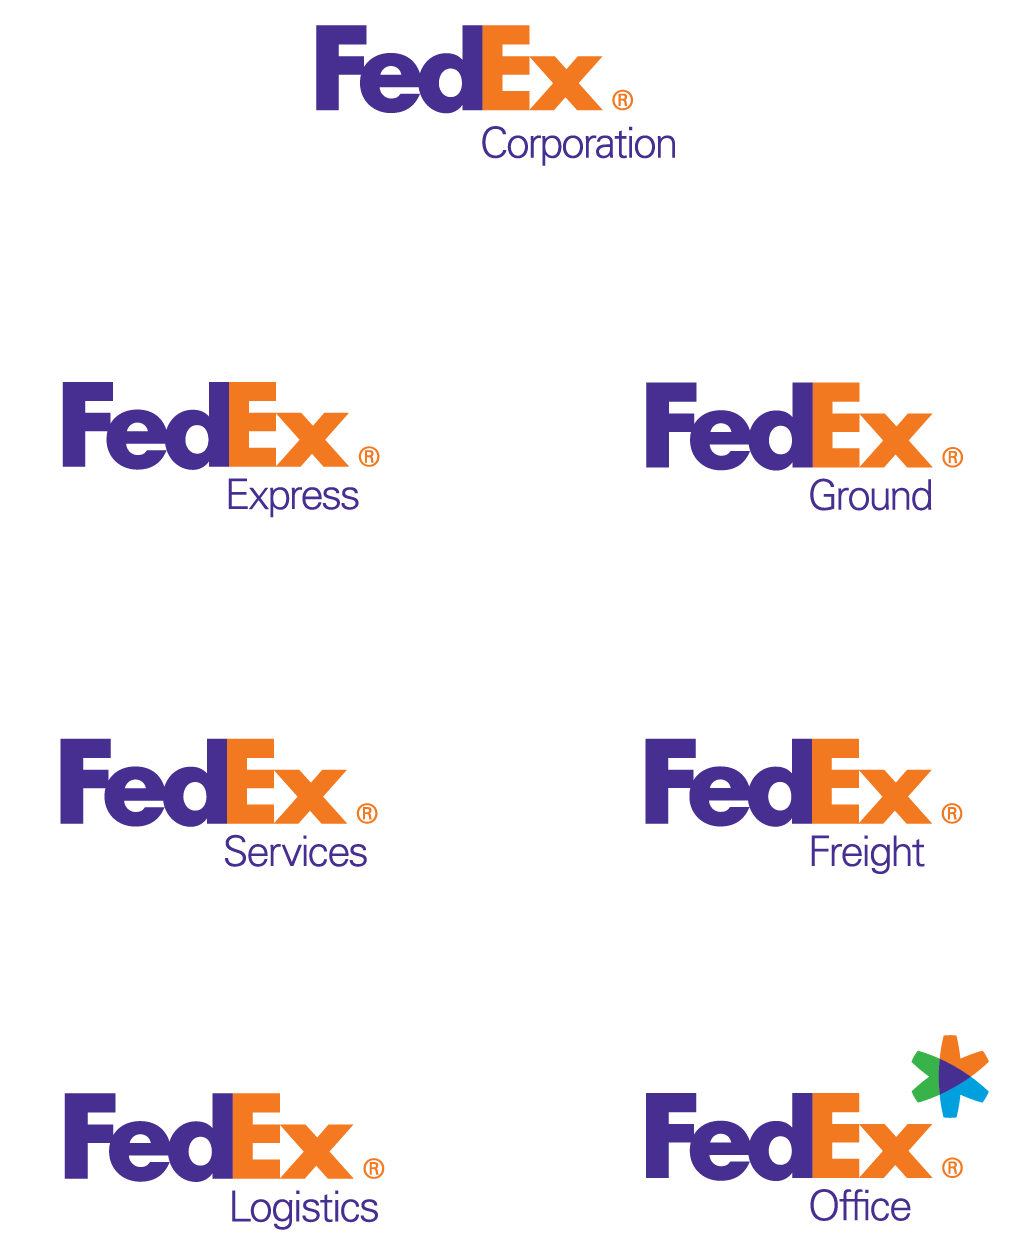 FedEx International Logo - Company Structure and Facts - About FedEx